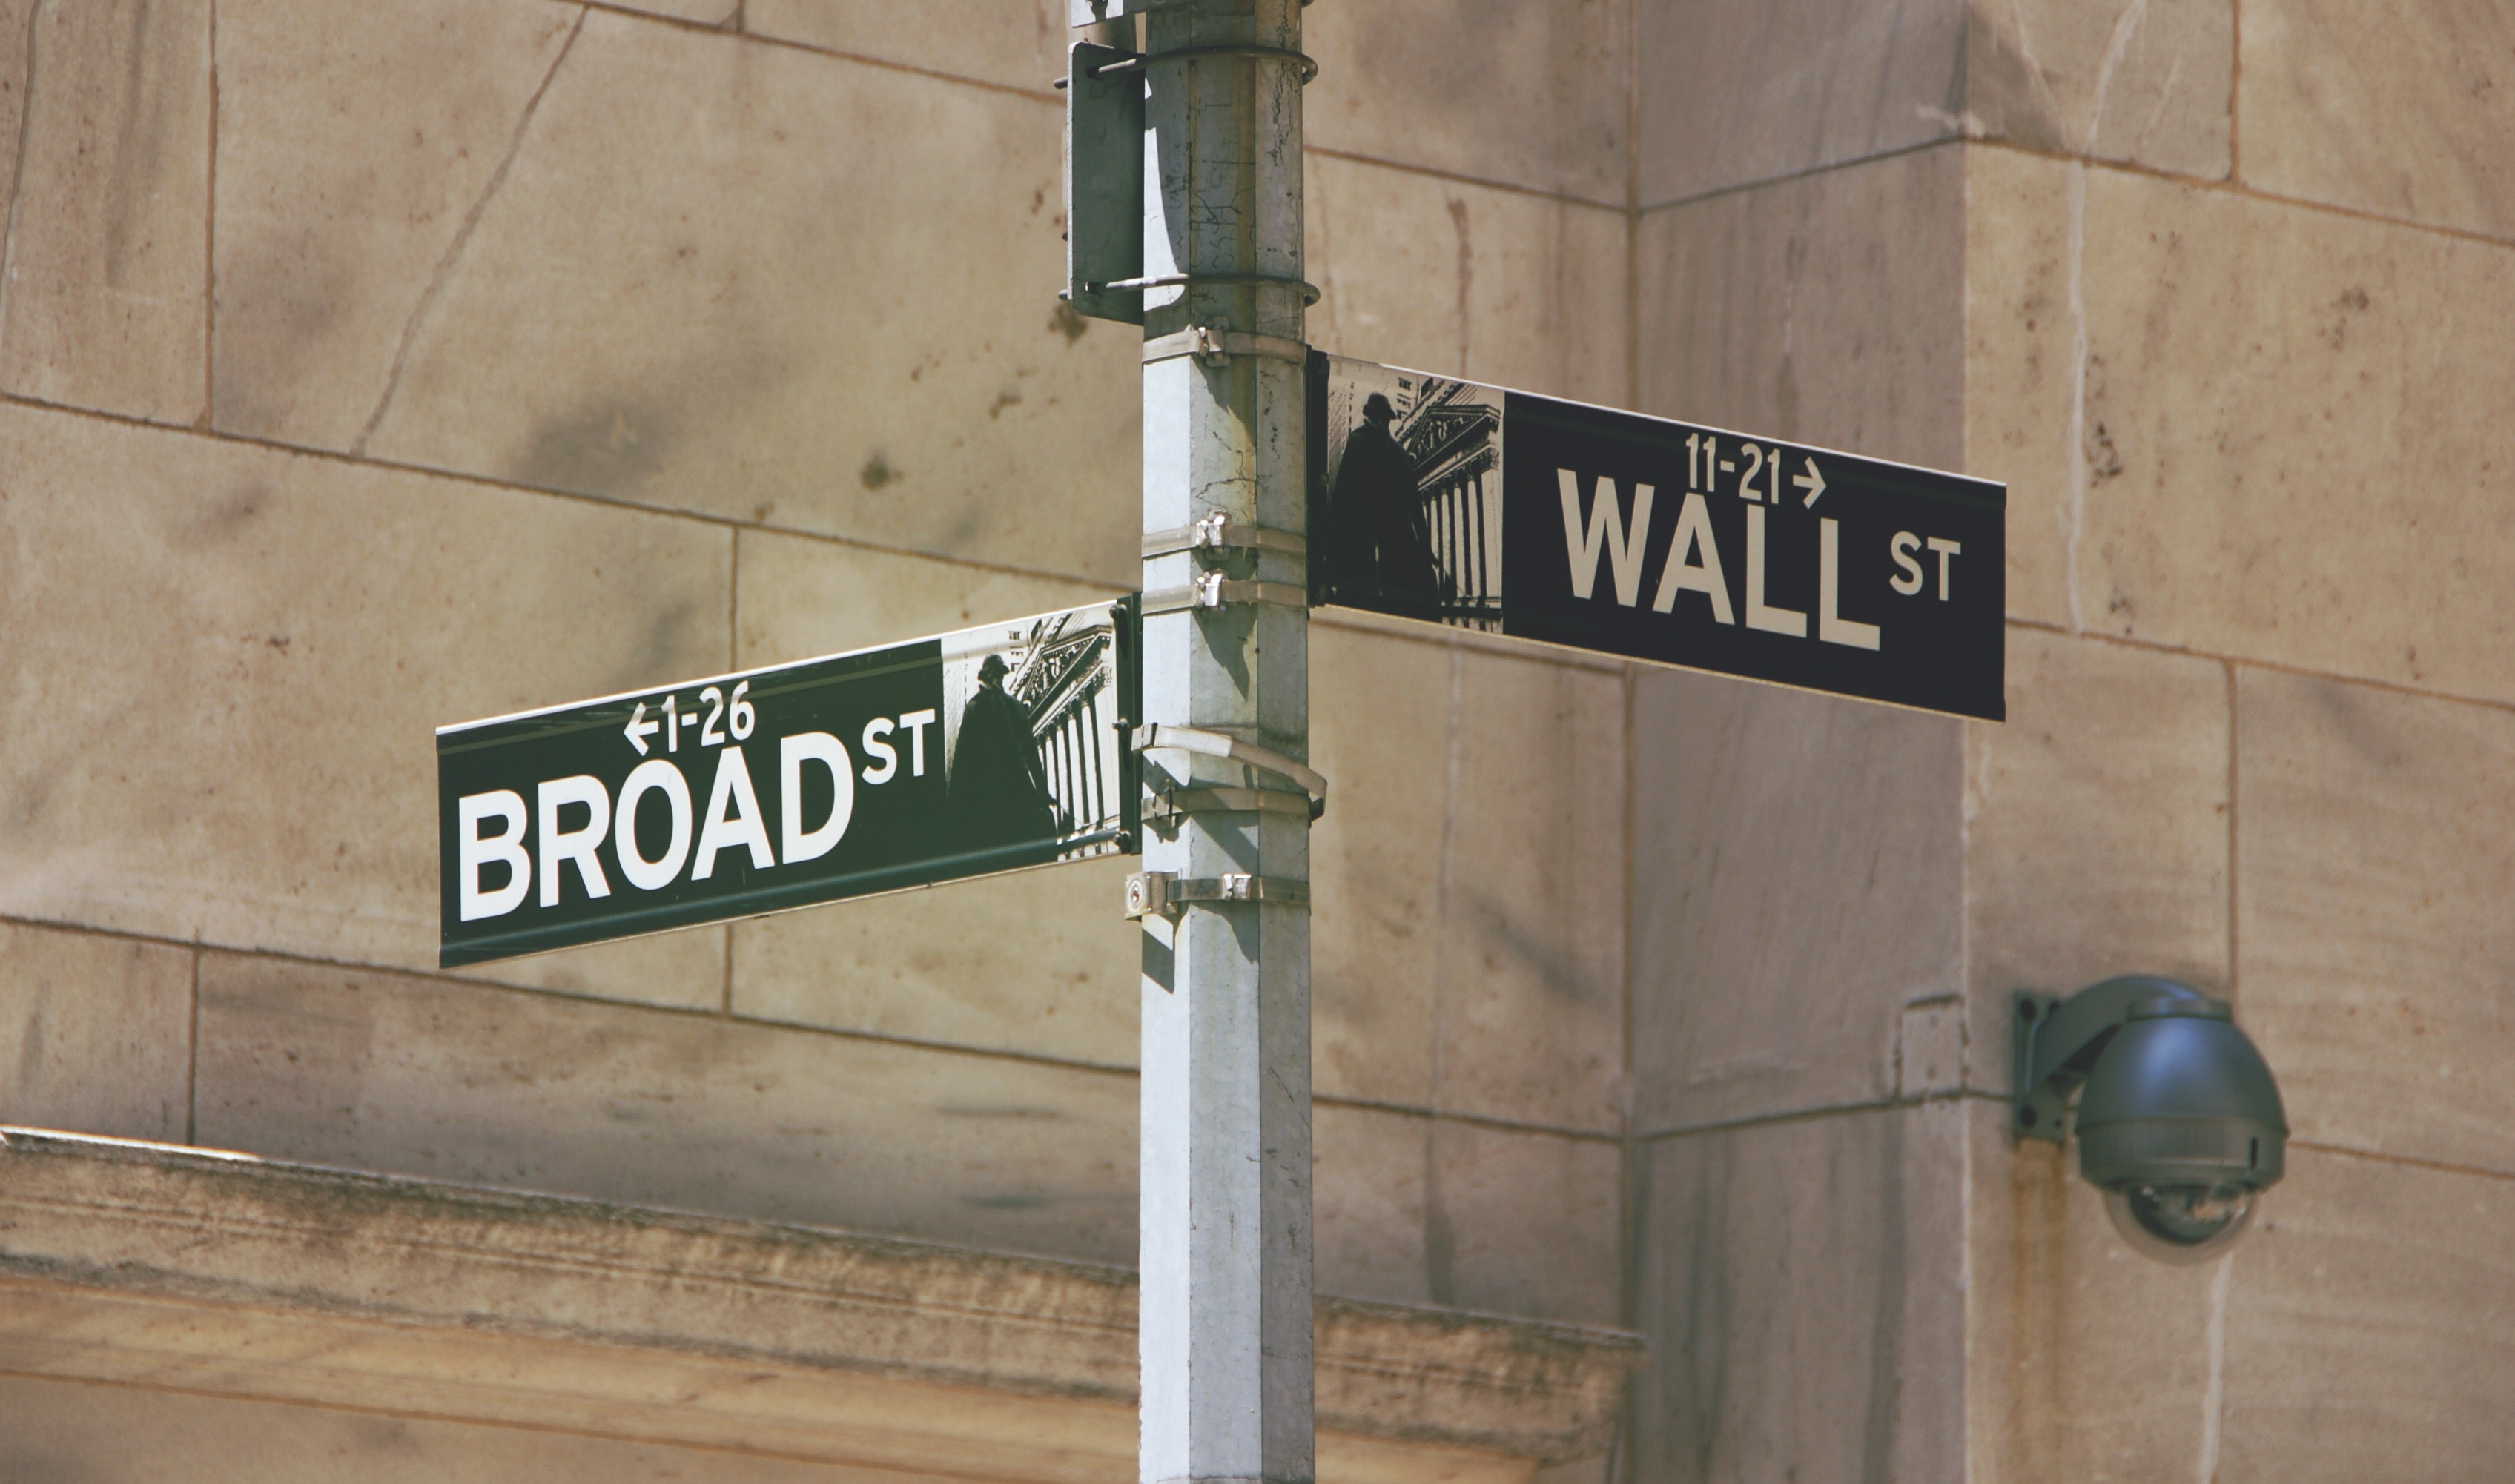 broad st and wall st signage